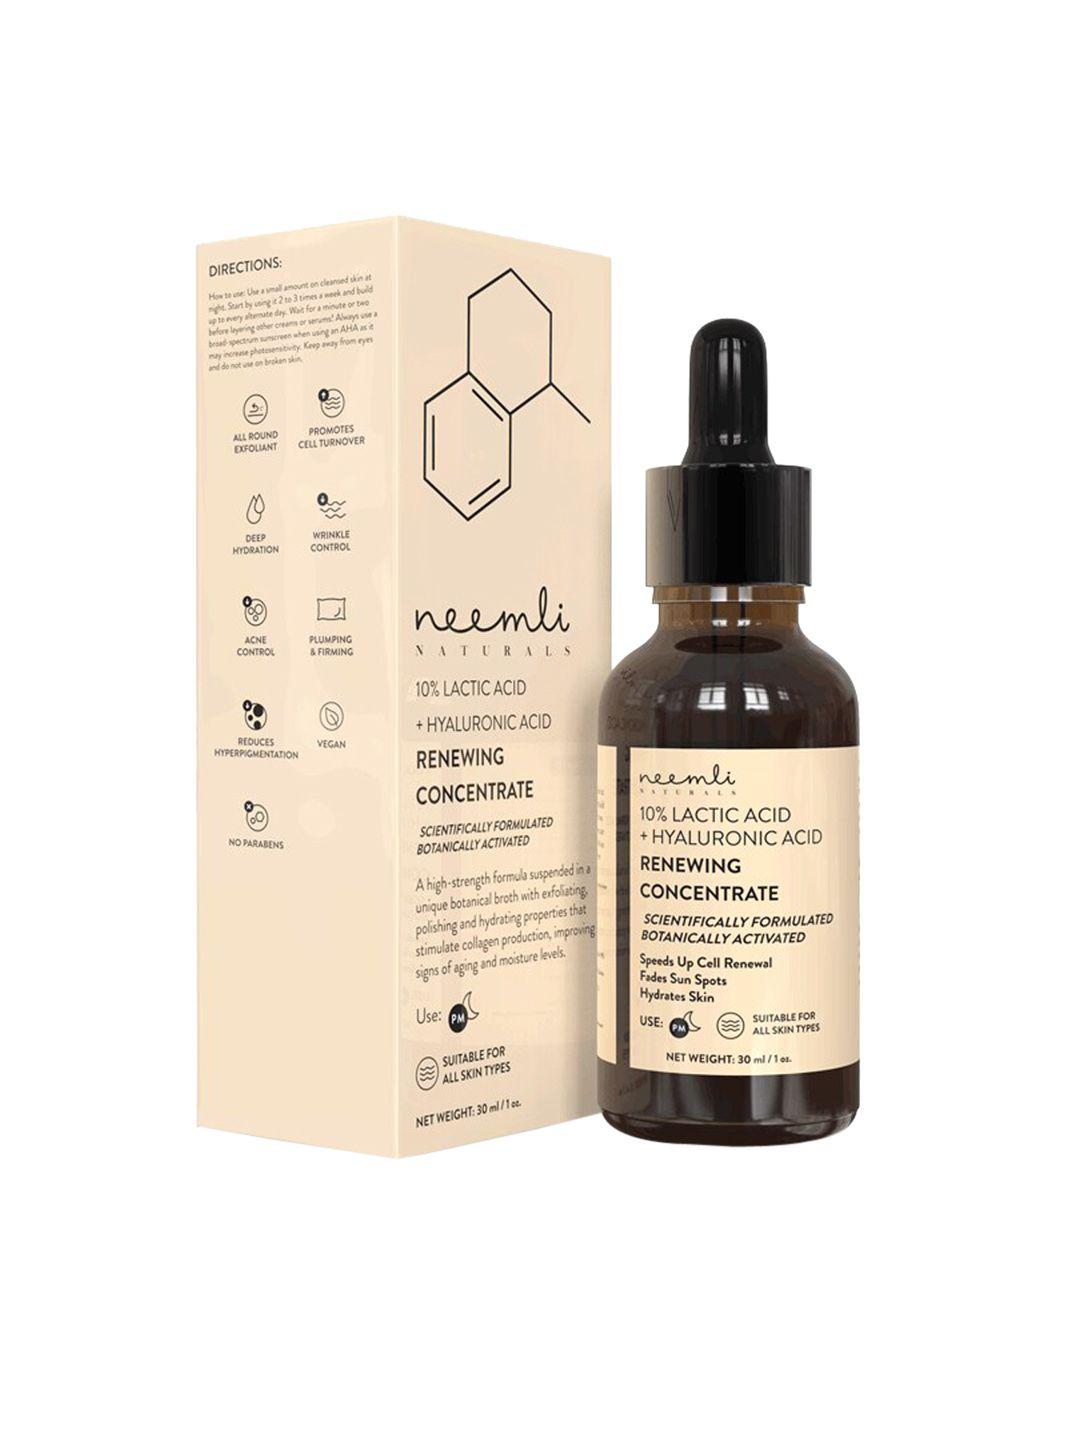 neemli naturals 10% lactic acid + hyaluronic acid renewing concentrate face serum - 30 ml